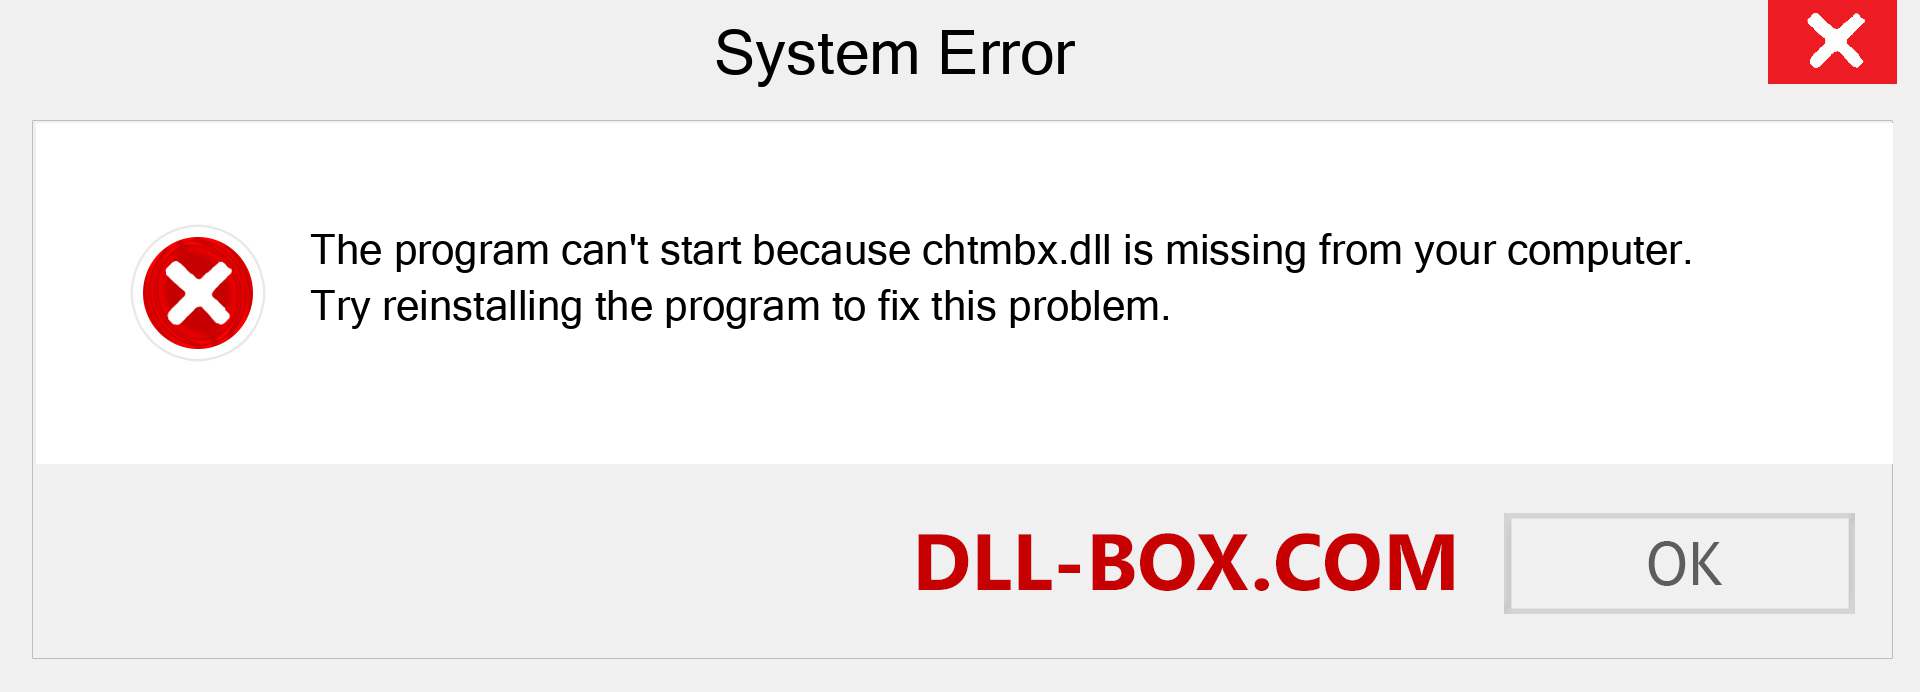  chtmbx.dll file is missing?. Download for Windows 7, 8, 10 - Fix  chtmbx dll Missing Error on Windows, photos, images